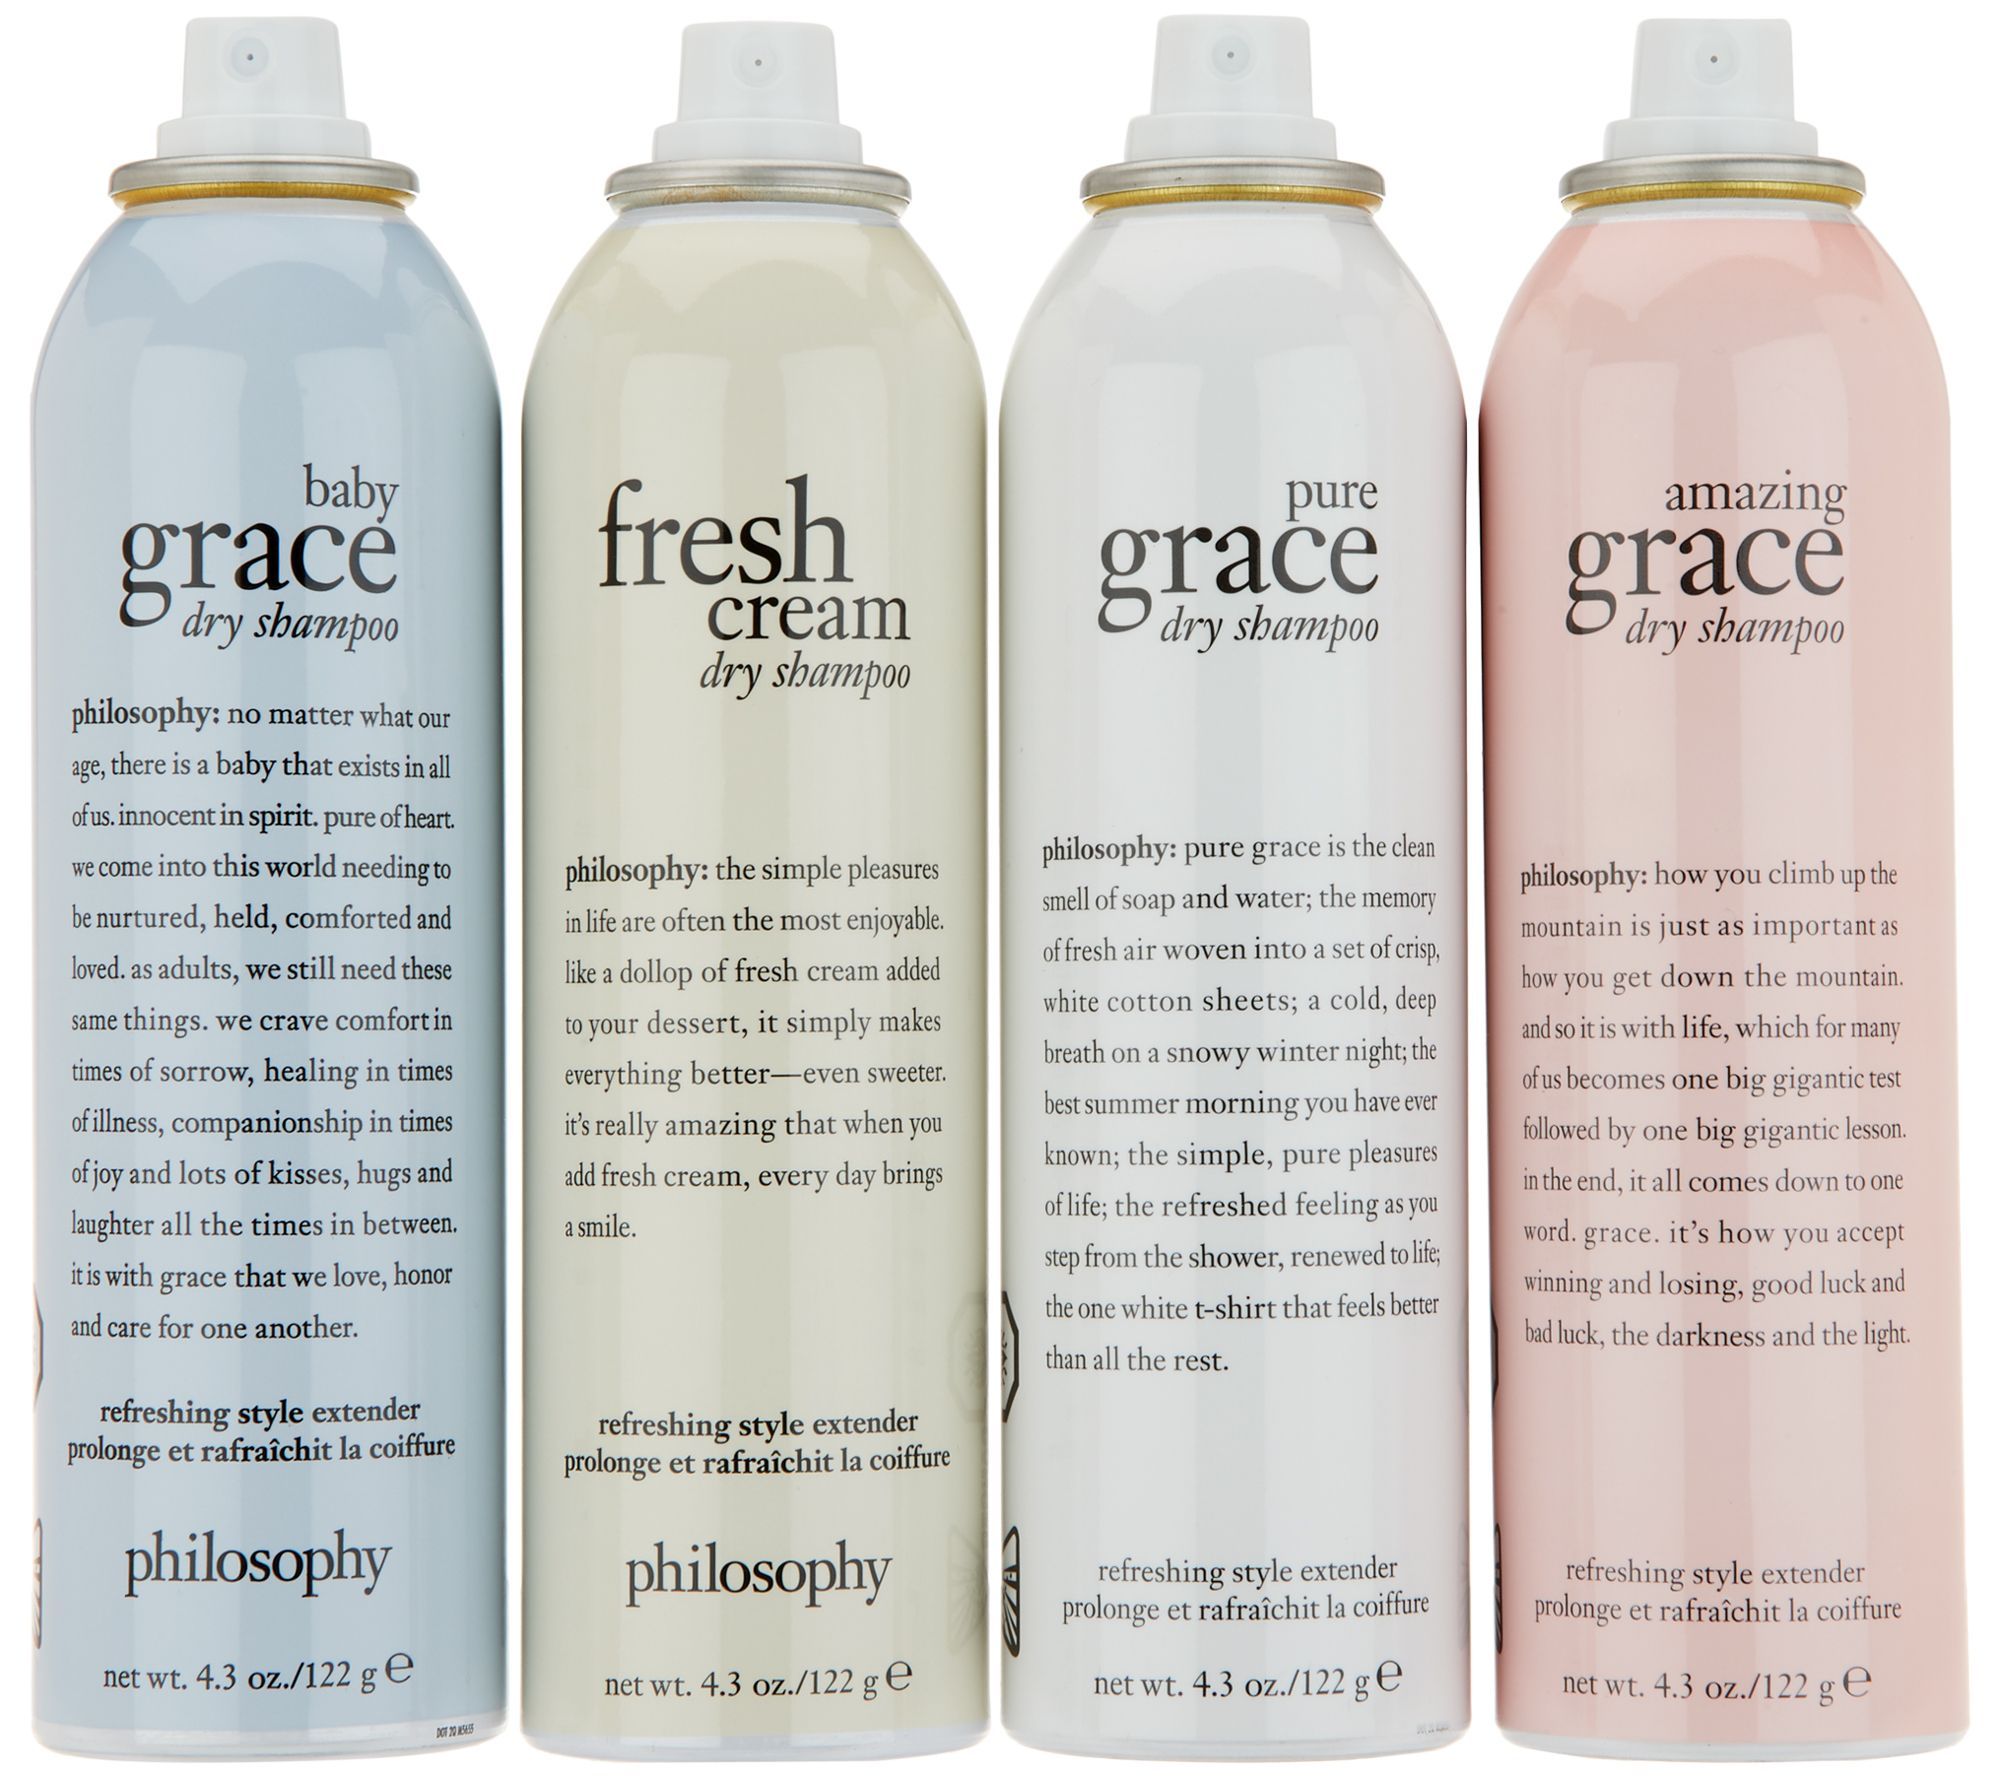 philosophy dry shampoo refreshing collection Auto-Delivery | QVC